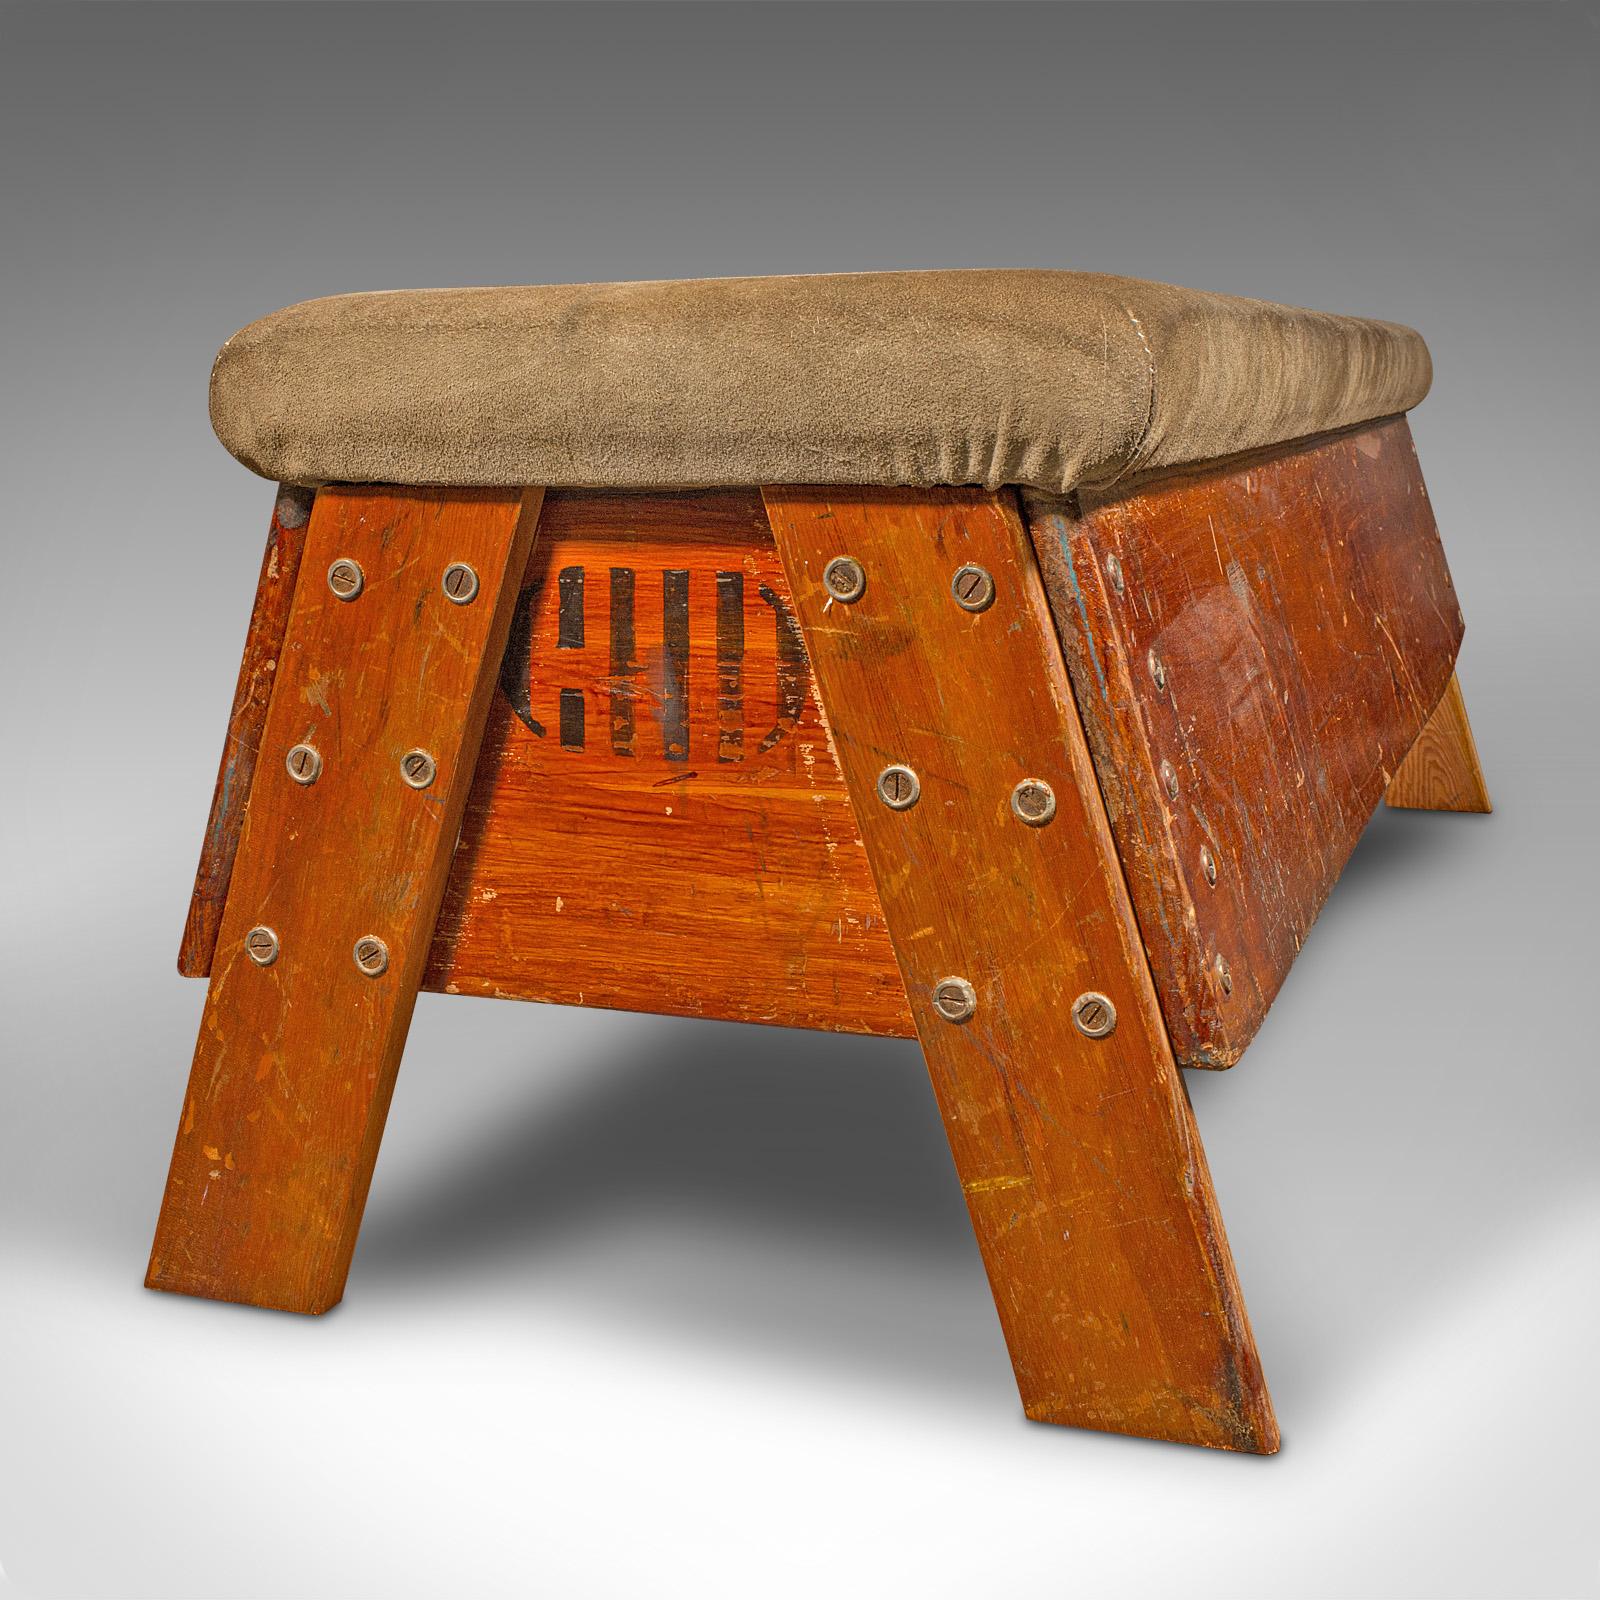 Vintage Gymnasium Bench, English, Pine, Suede, Window Seat, Dining Room, C.1930 For Sale 1